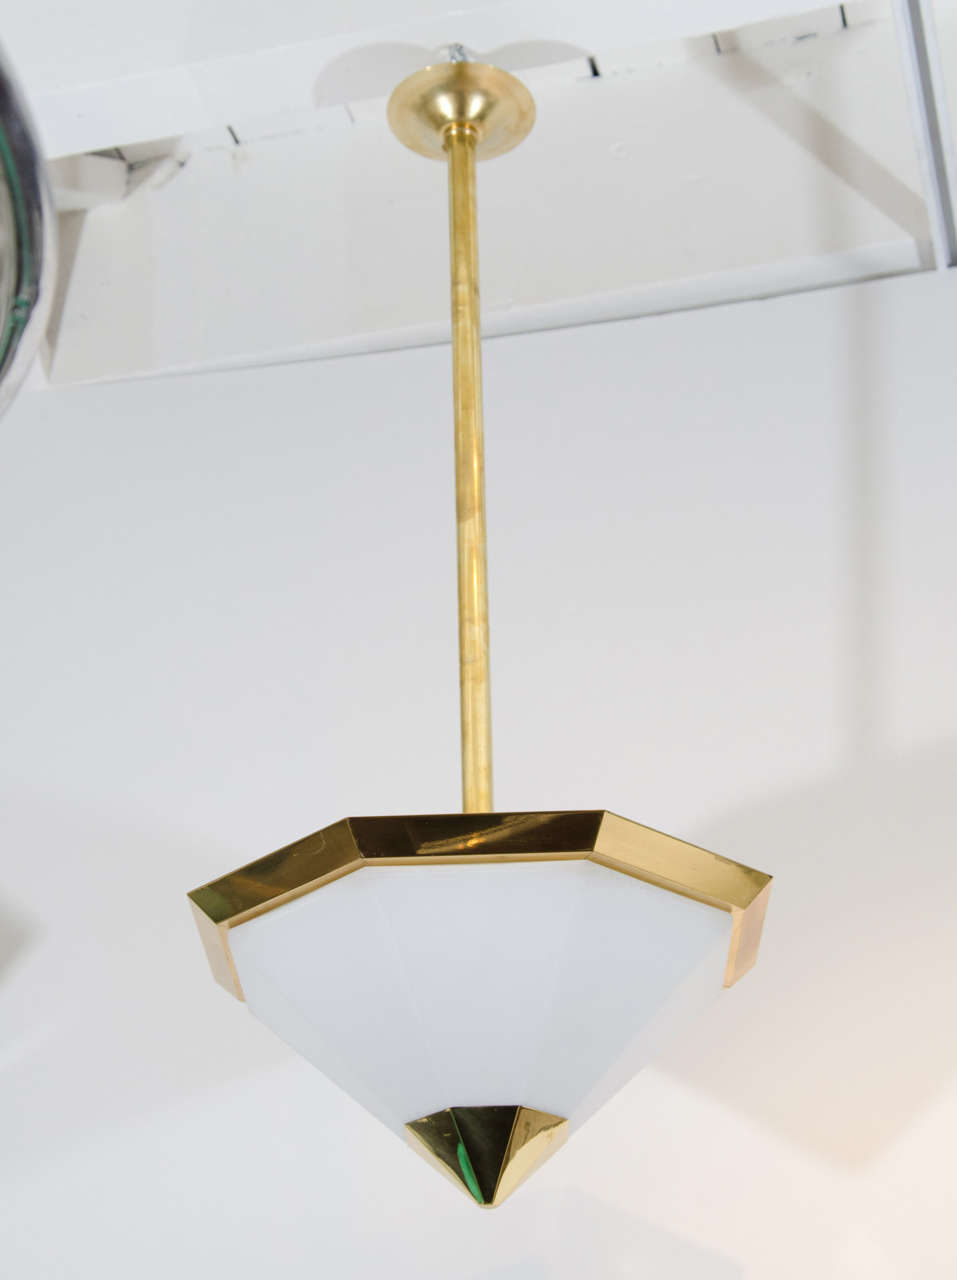 Pair of octagonal brass pendant light fixtures with faceted frosted glass shades. Also available as ceiling lights.
Six available. Height adjustable.